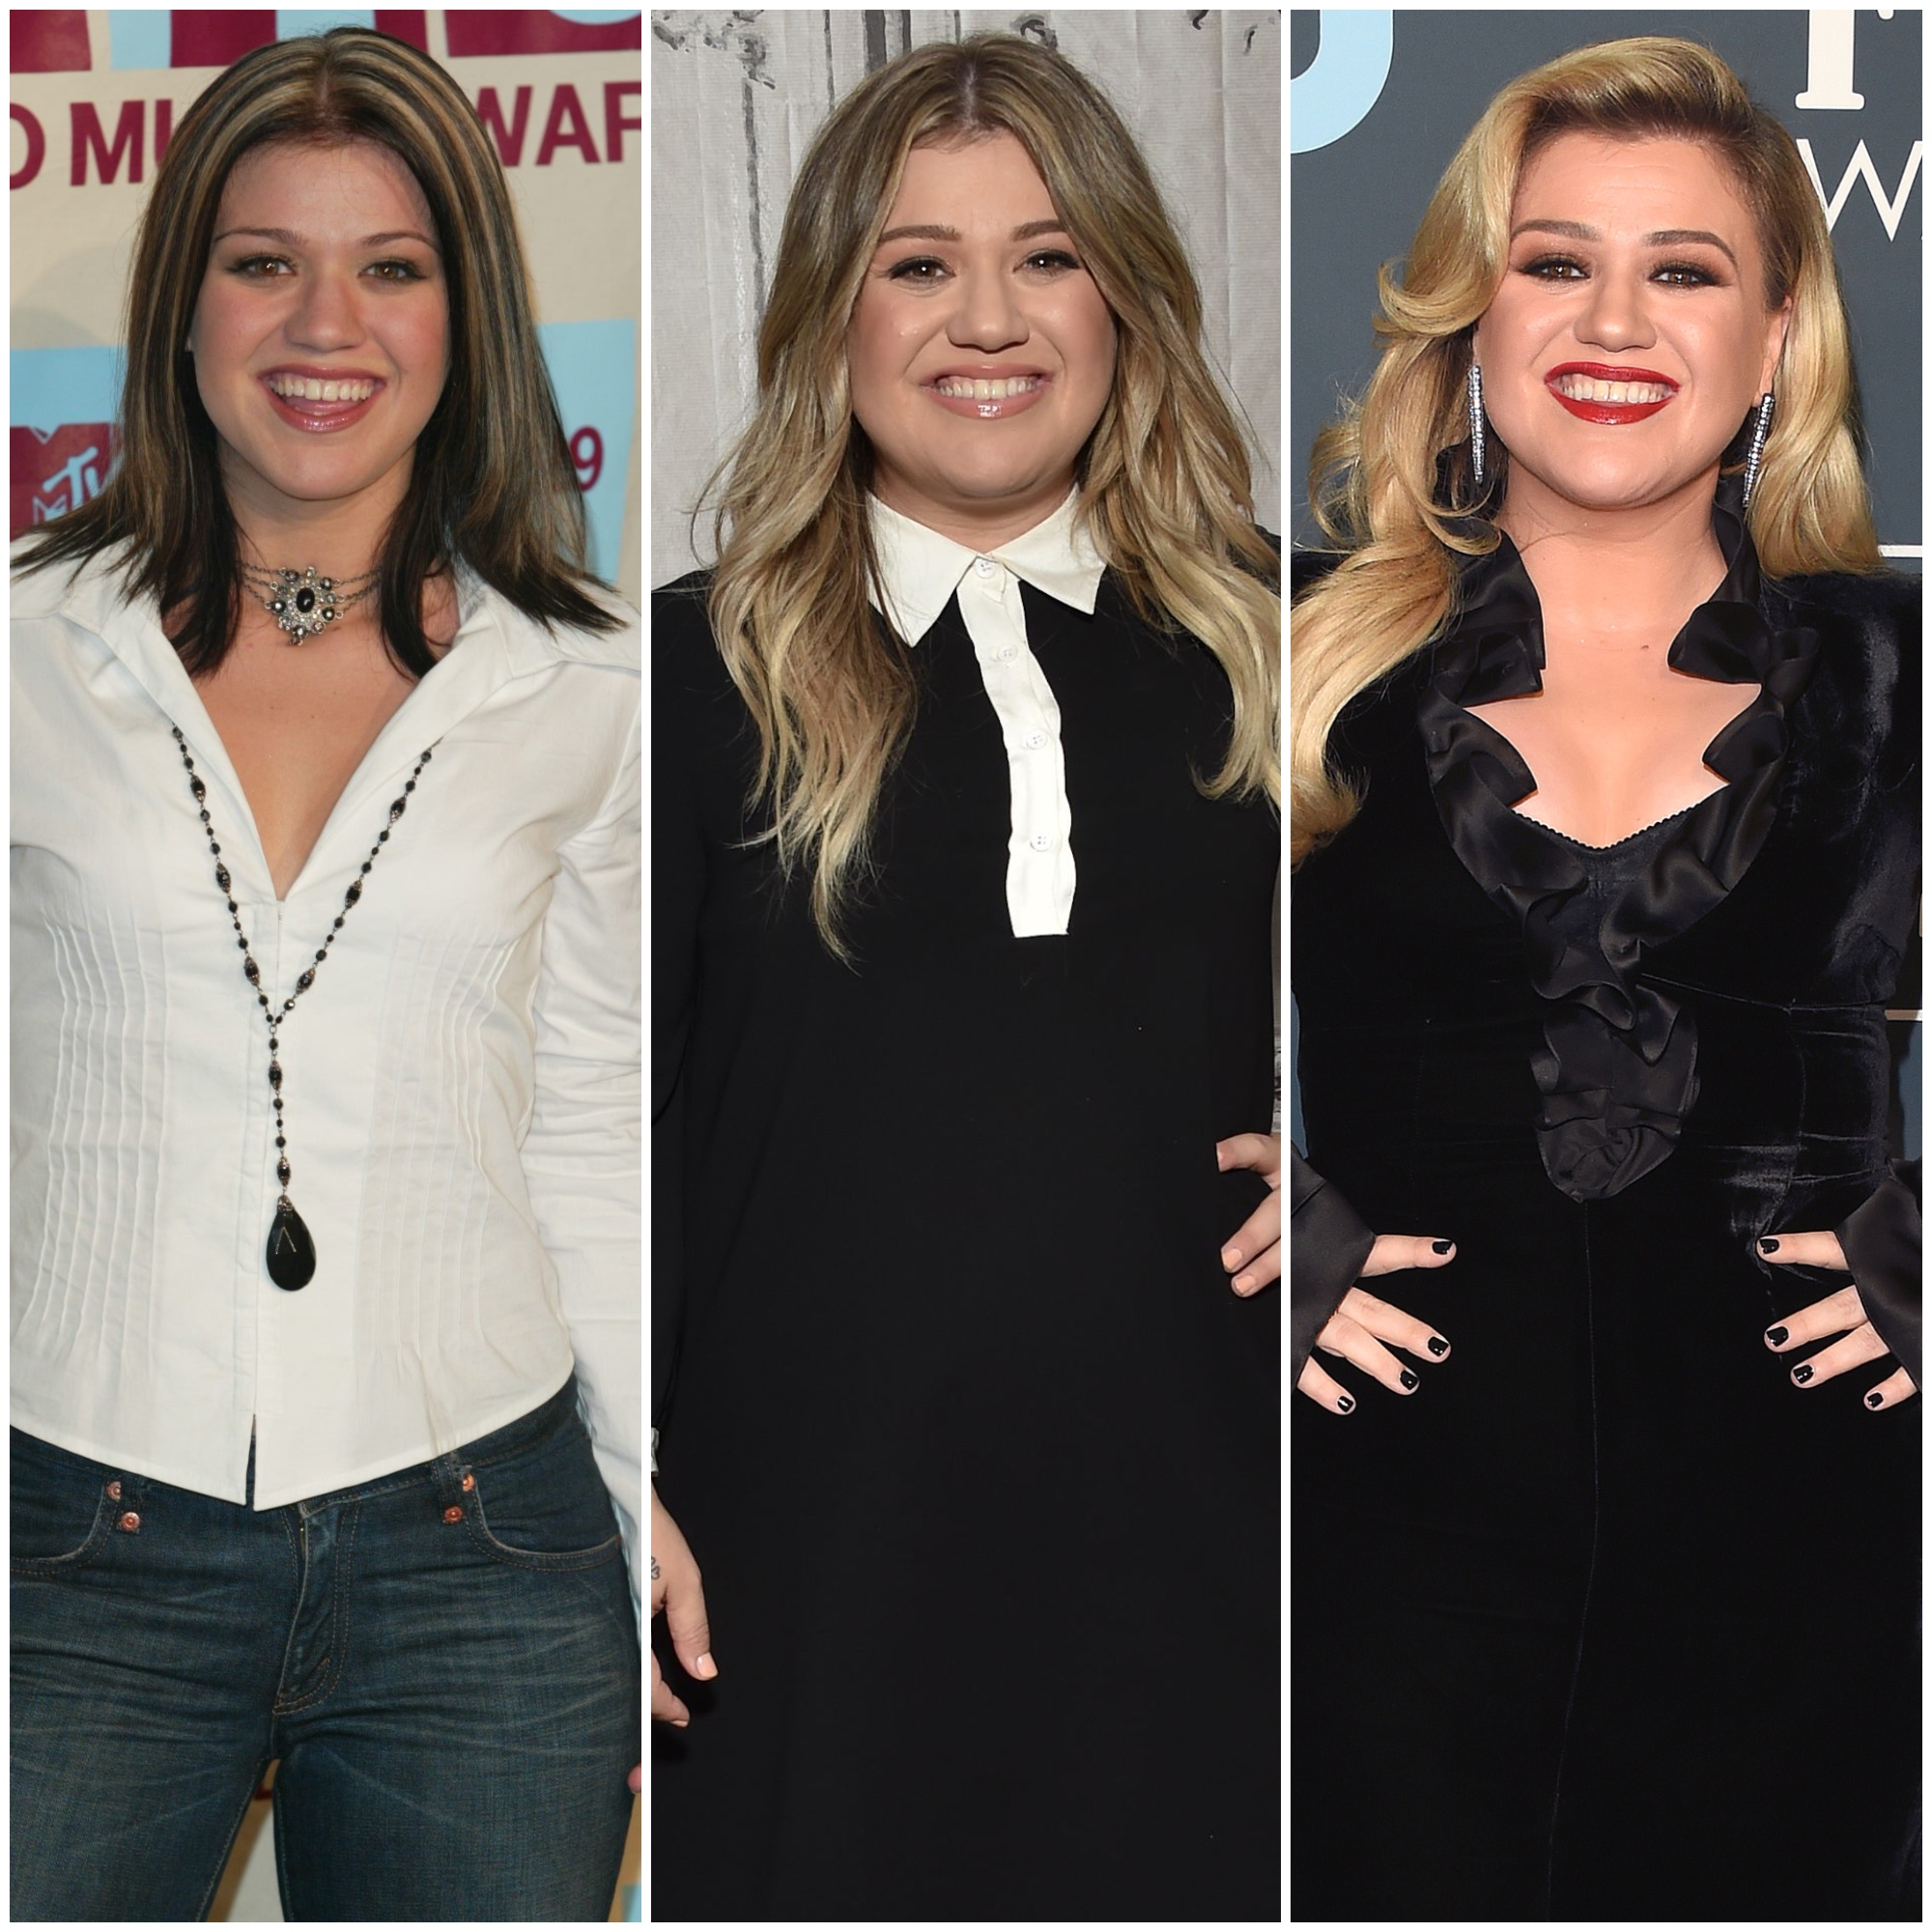 Kelly Clarkson's Hairstyles & Hair Colors | Steal Her Style